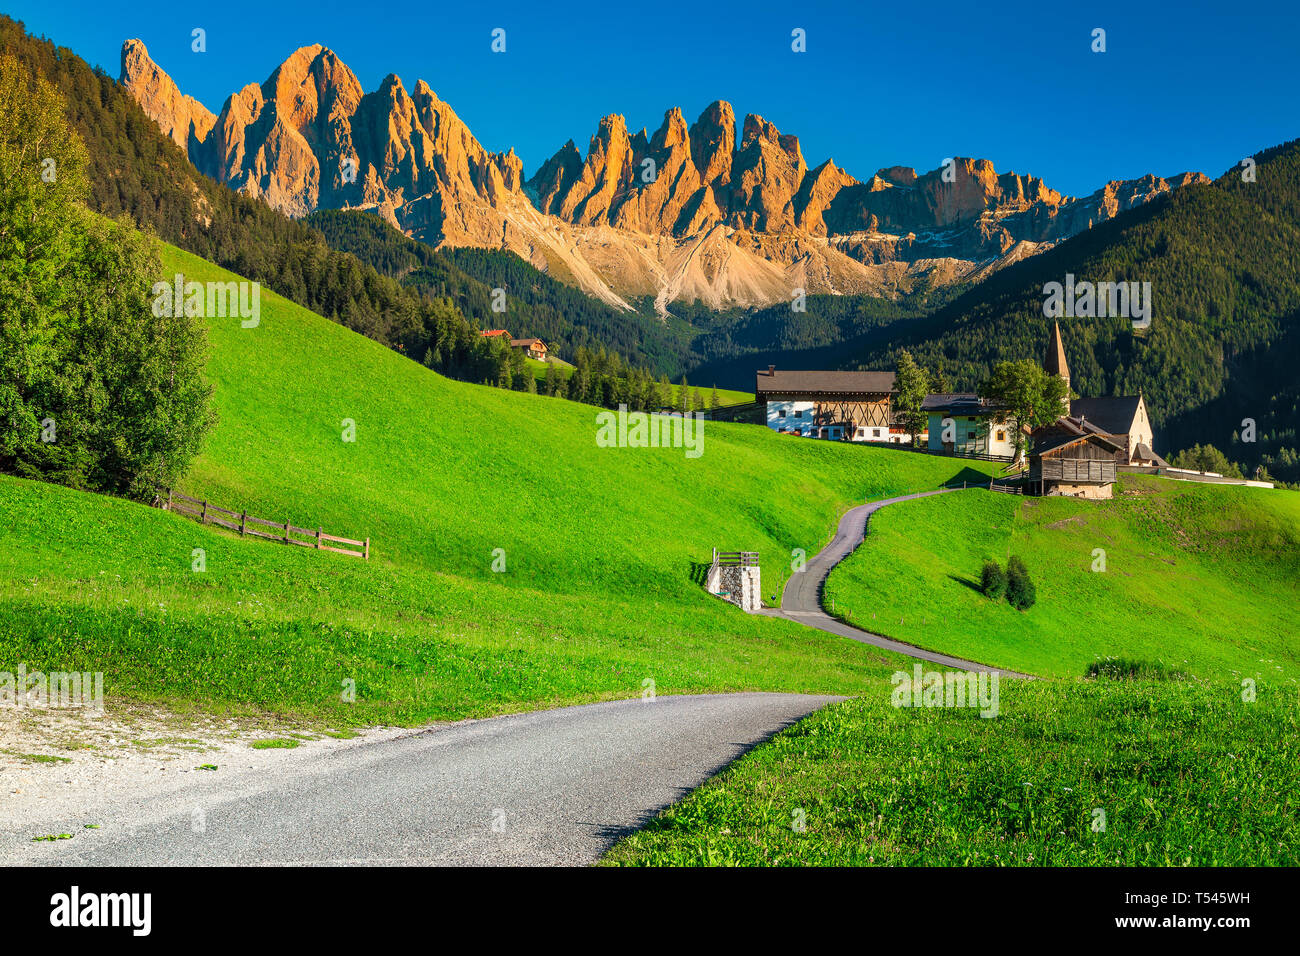 Stunning alpine travel, tourism and hiking destination, Santa Maddalena village with magical Dolomites mountains in background at sunset, Val di Funes Stock Photo